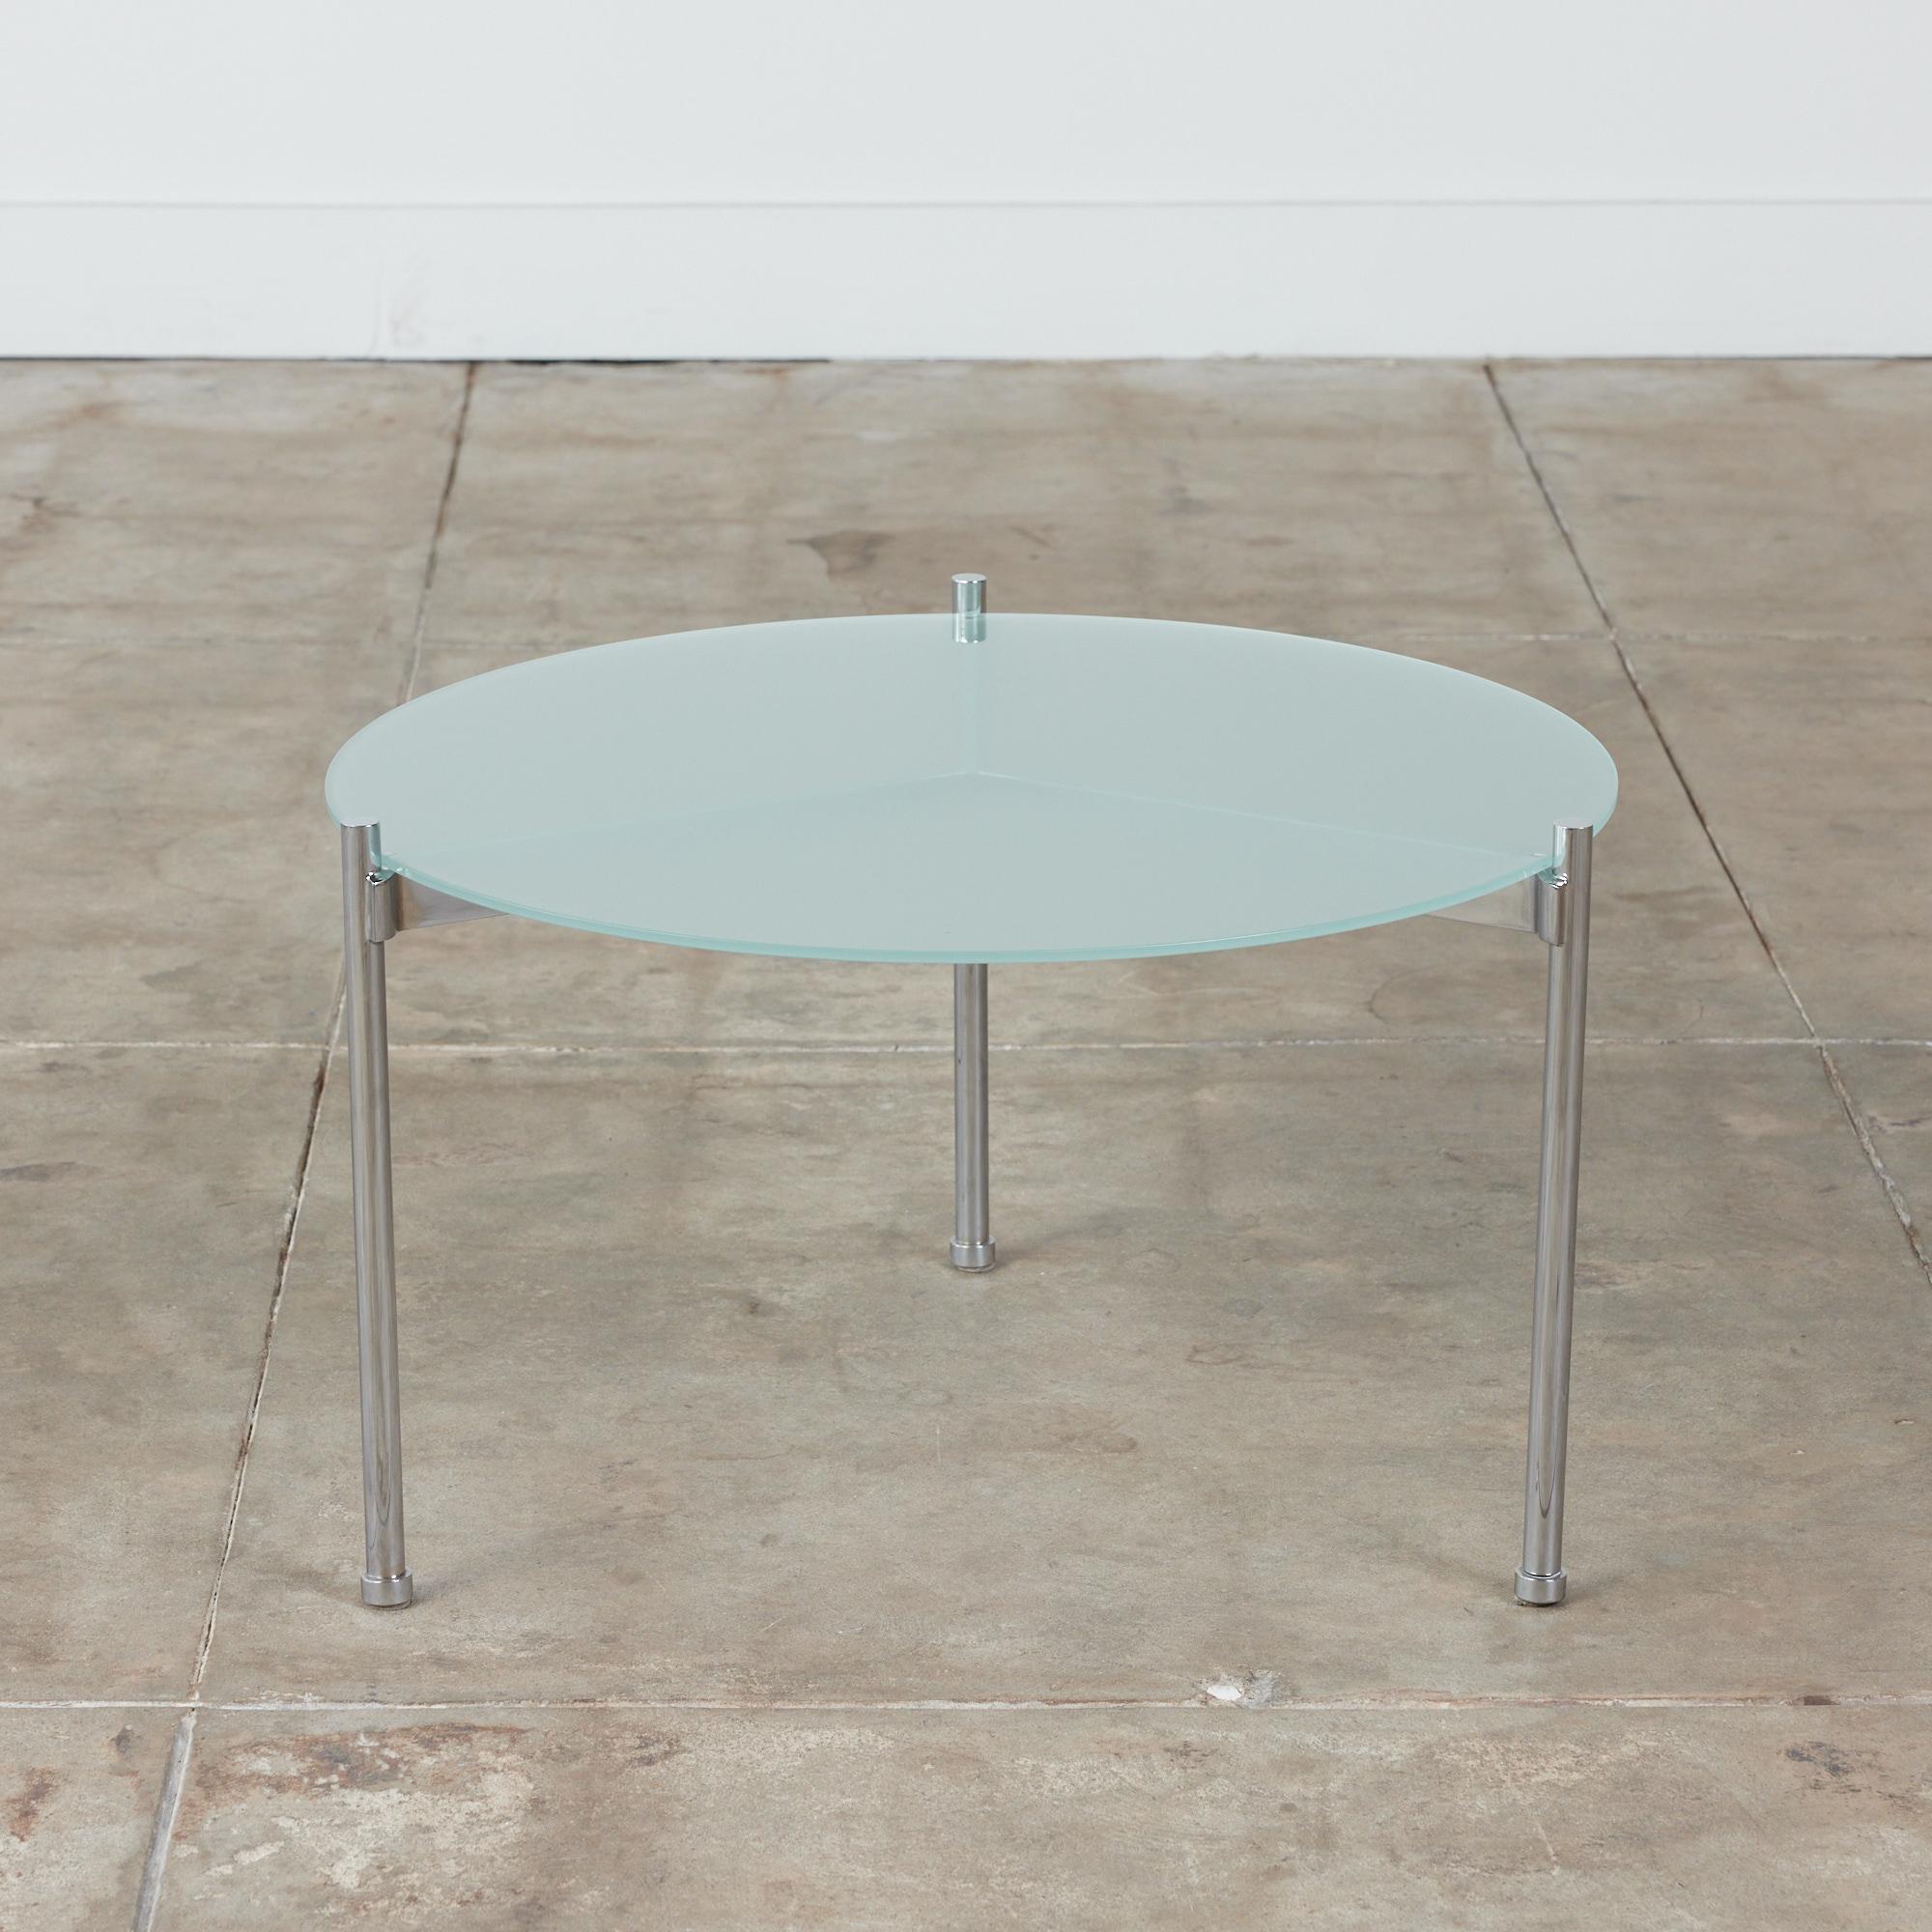 Minimalist side table by Ward Bennett for Brickel Associates, circa 1970s, USA. The round table features a steel chrome plated frame with three tubular legs. The table earned its name from the three stretches that rest just below the glass table top